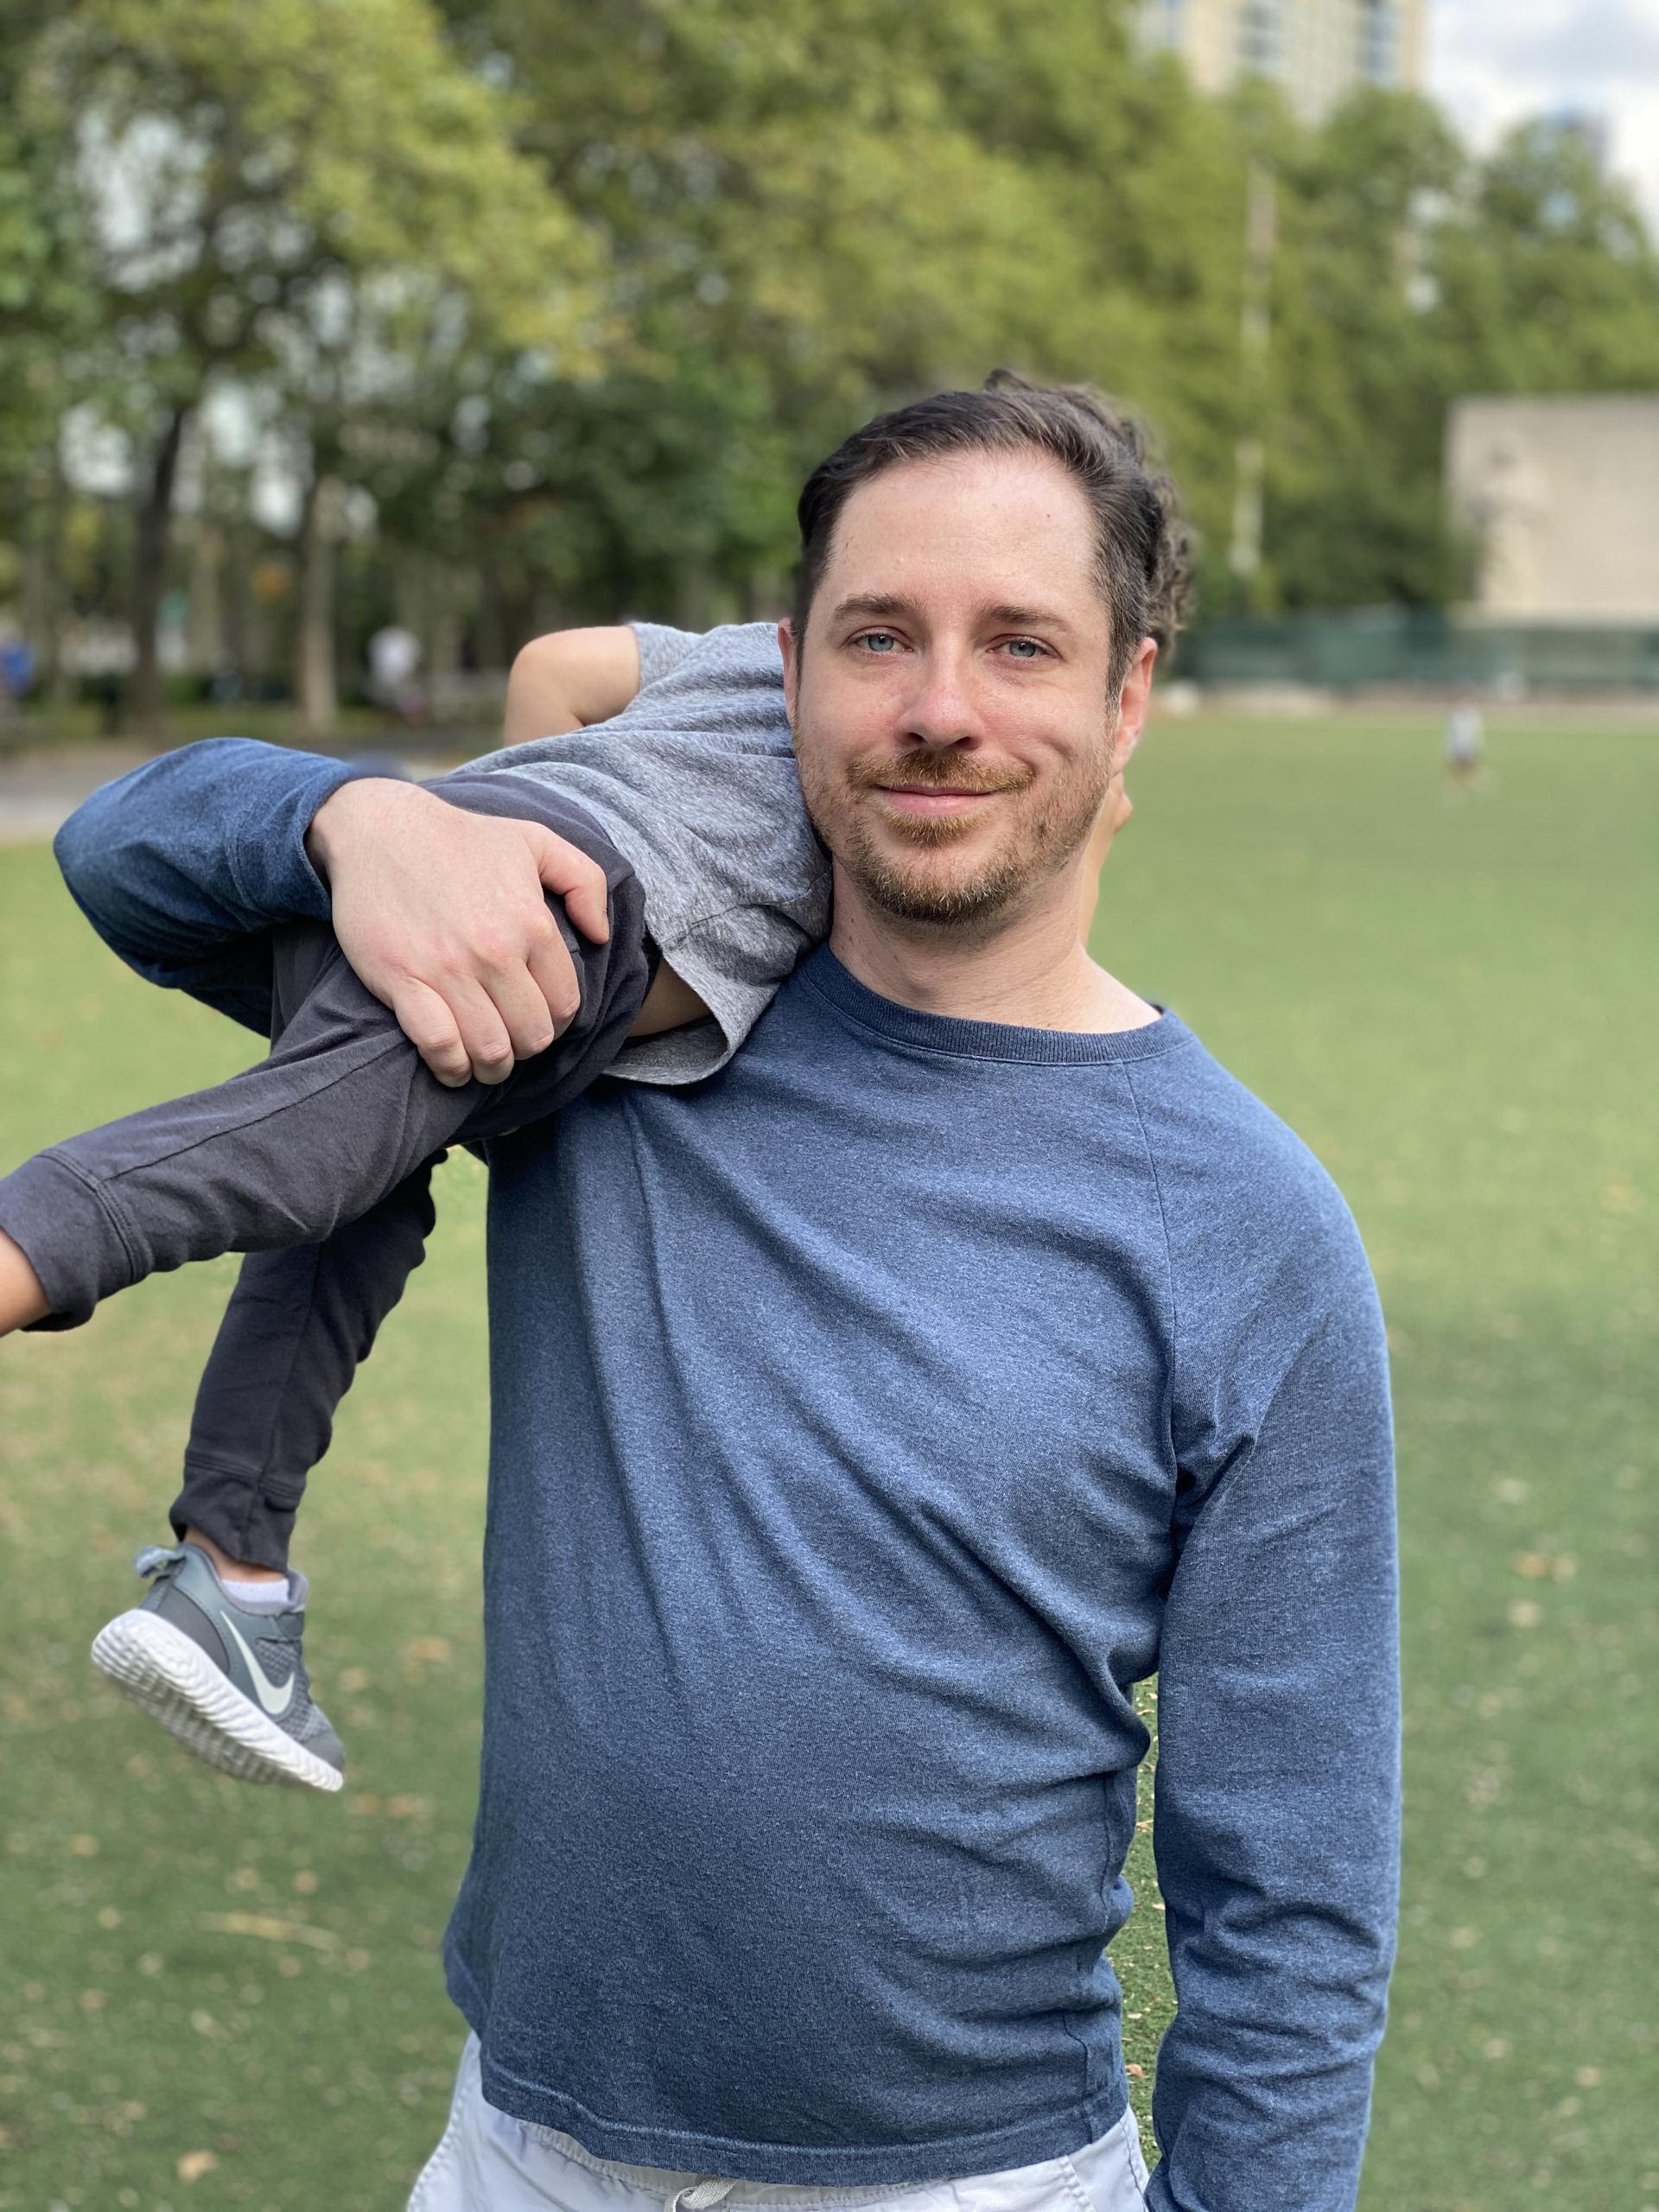 john holding his kid over his shoulder in a park